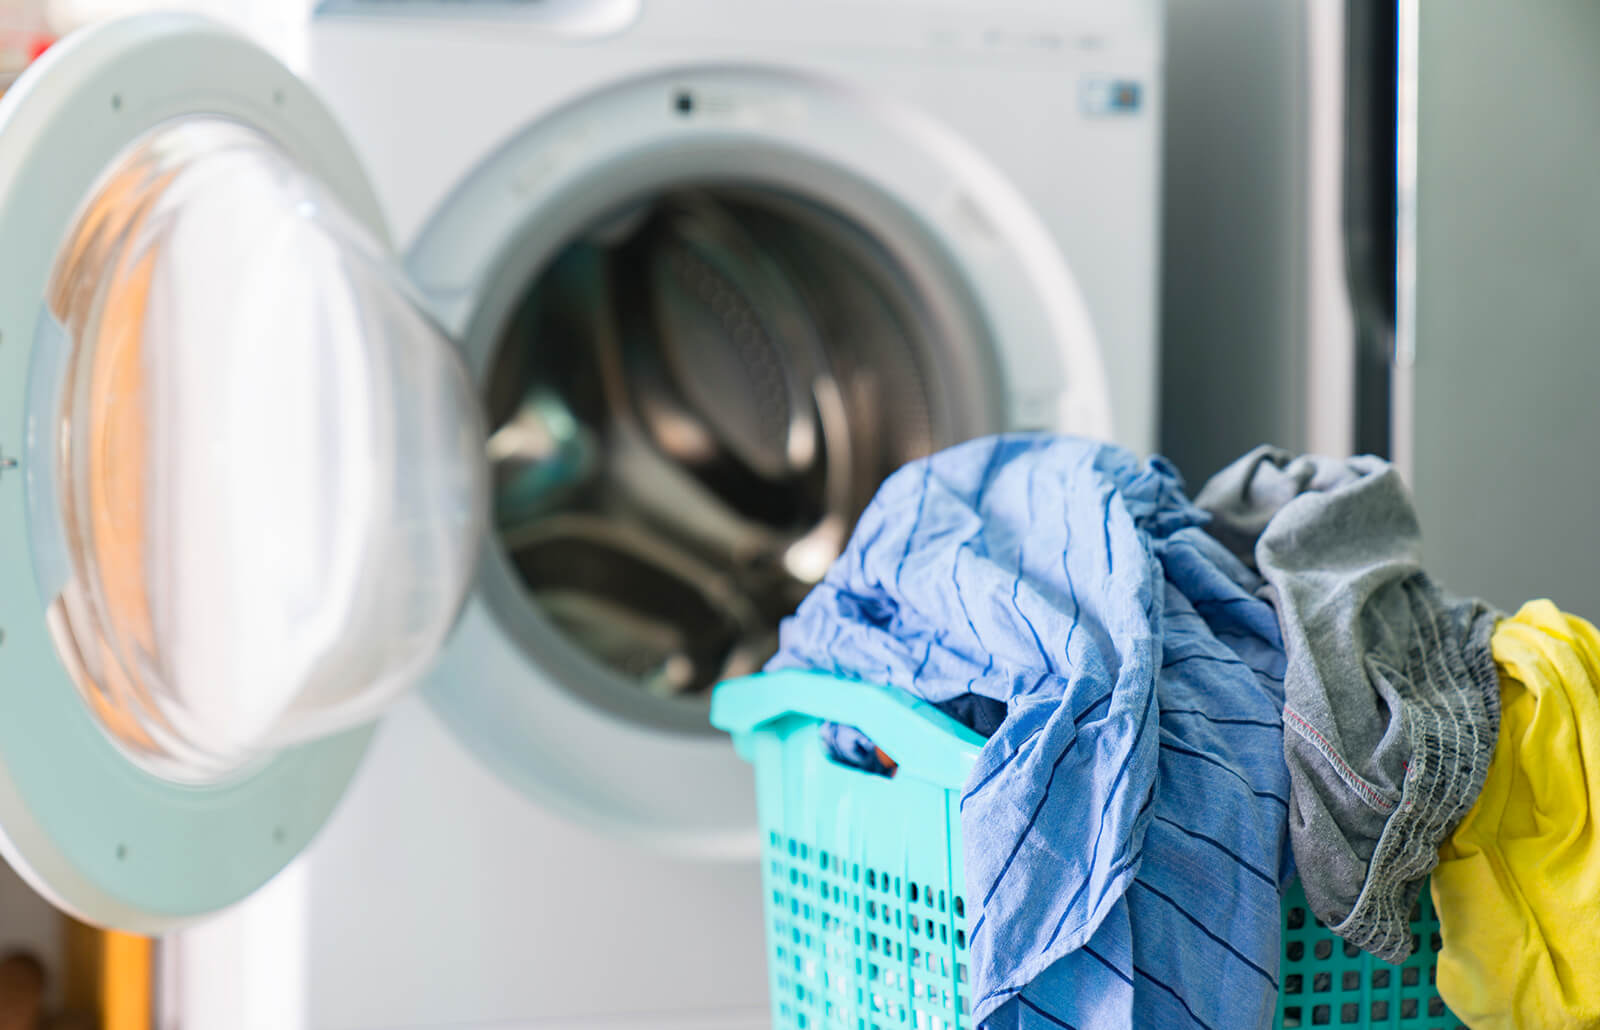 Everyone should follow these tips while washing clothes